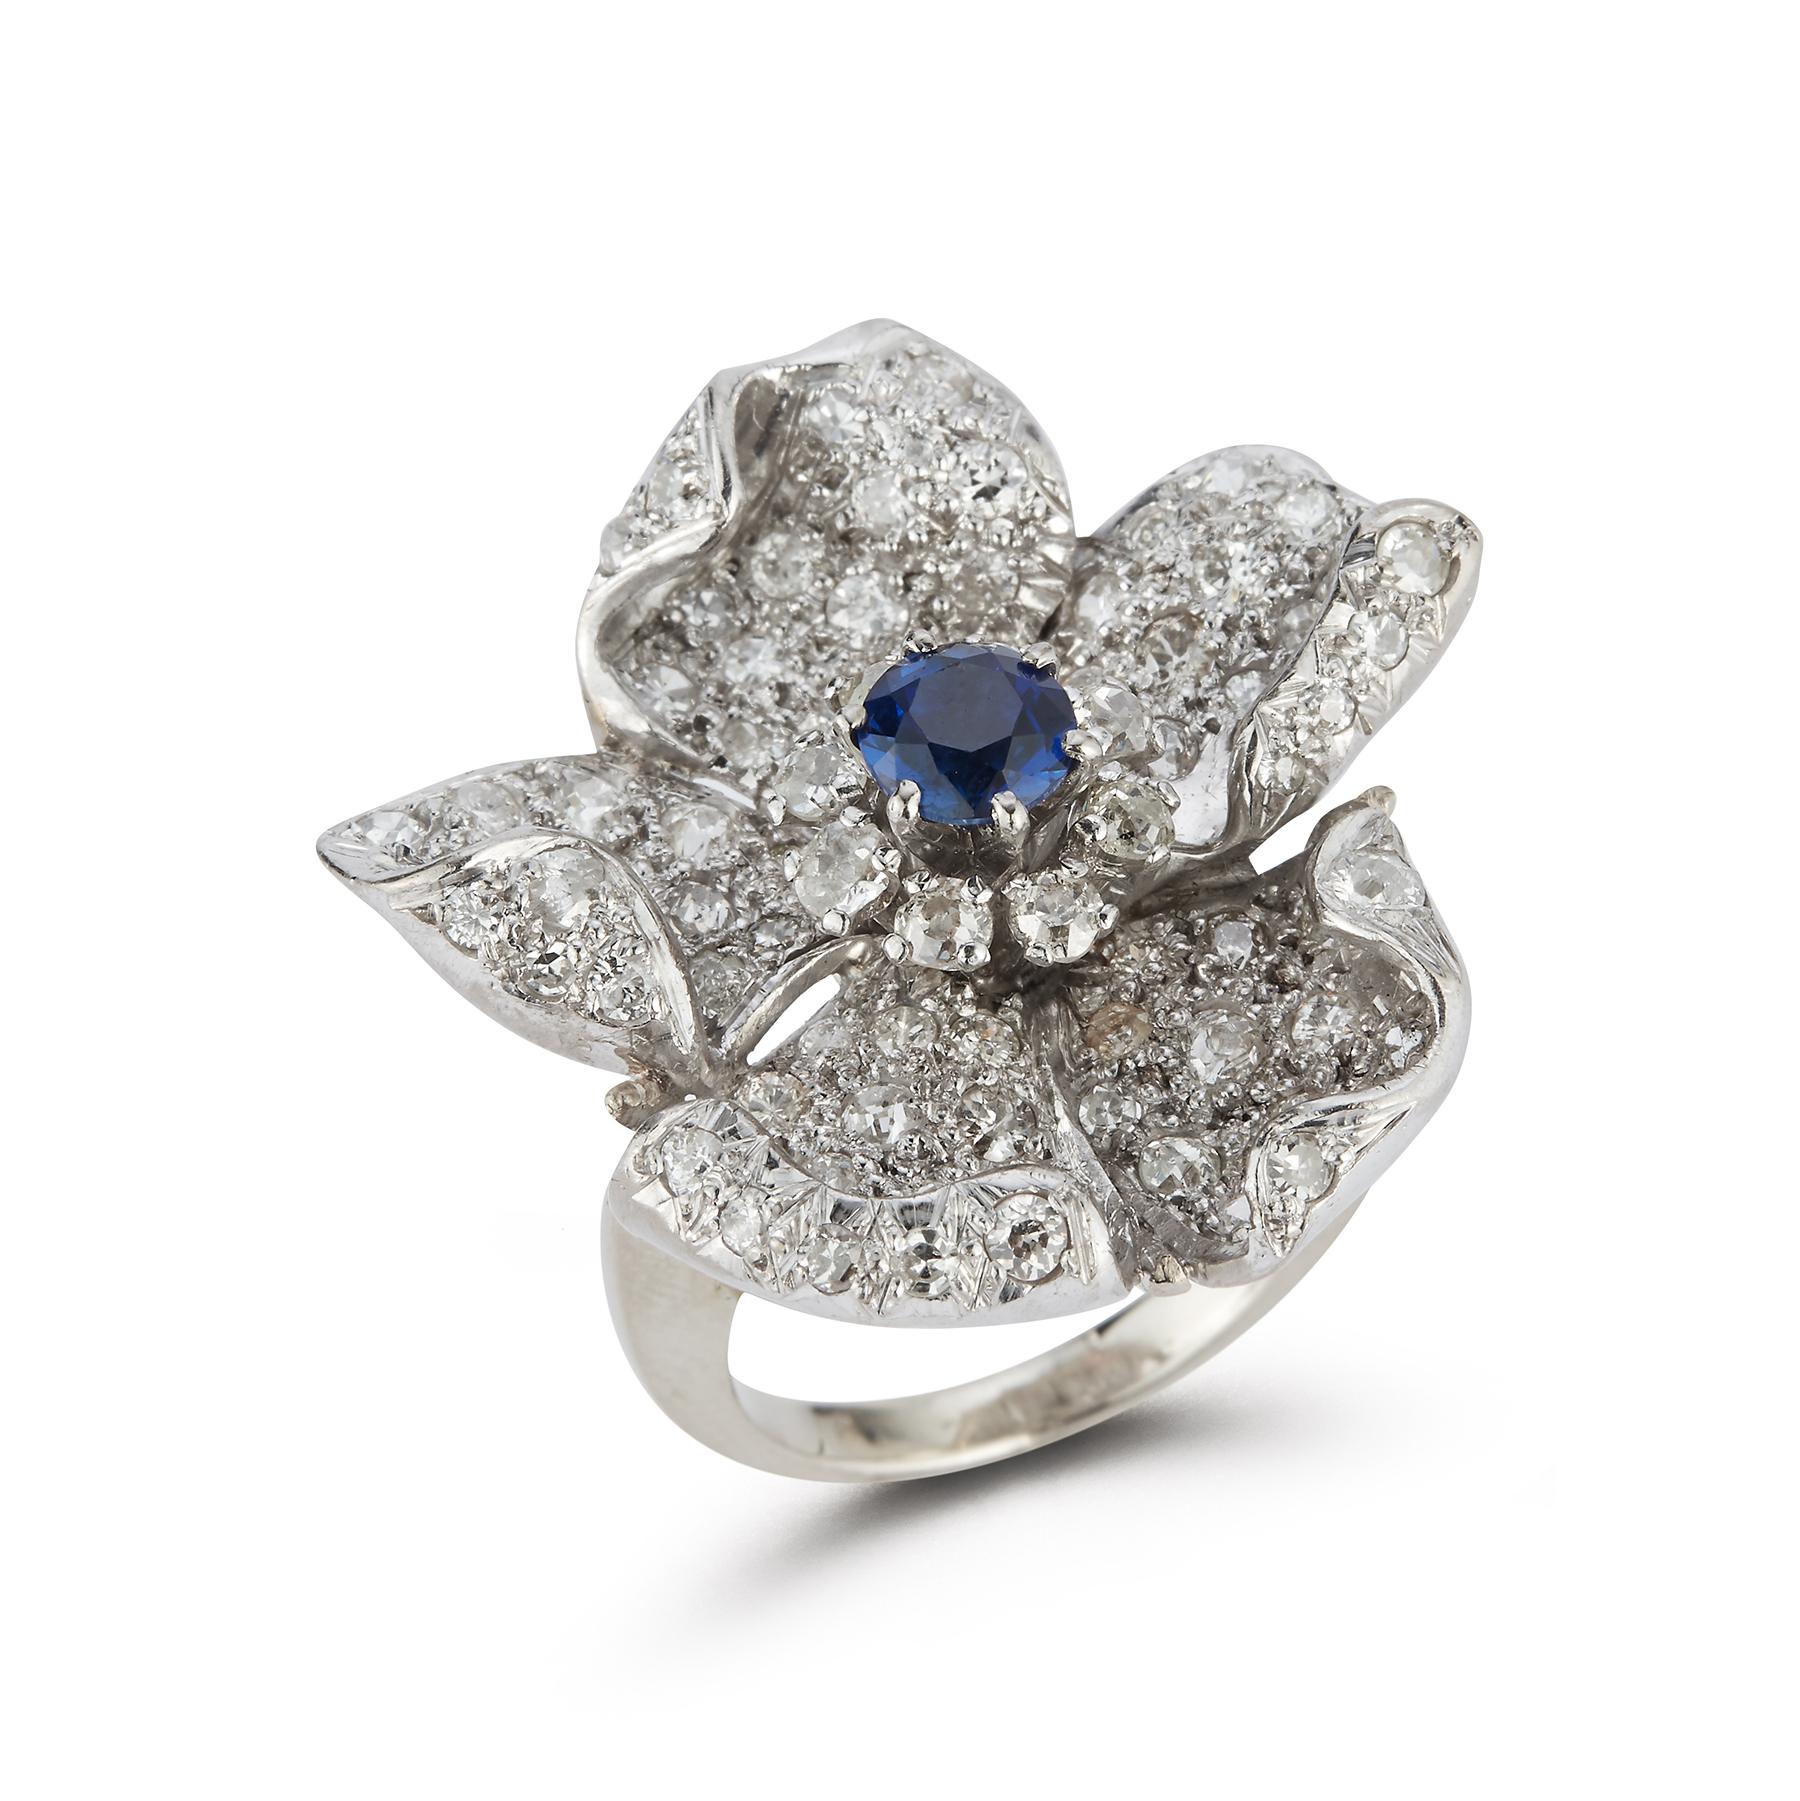 Sapphire & Pave Diamond Flower Cocktail Ring, 1 round cut sapphire surrounded by pave diamonds
Ring size: 8 
Re sizable free of charge 
Gold Type: 14K White Gold 